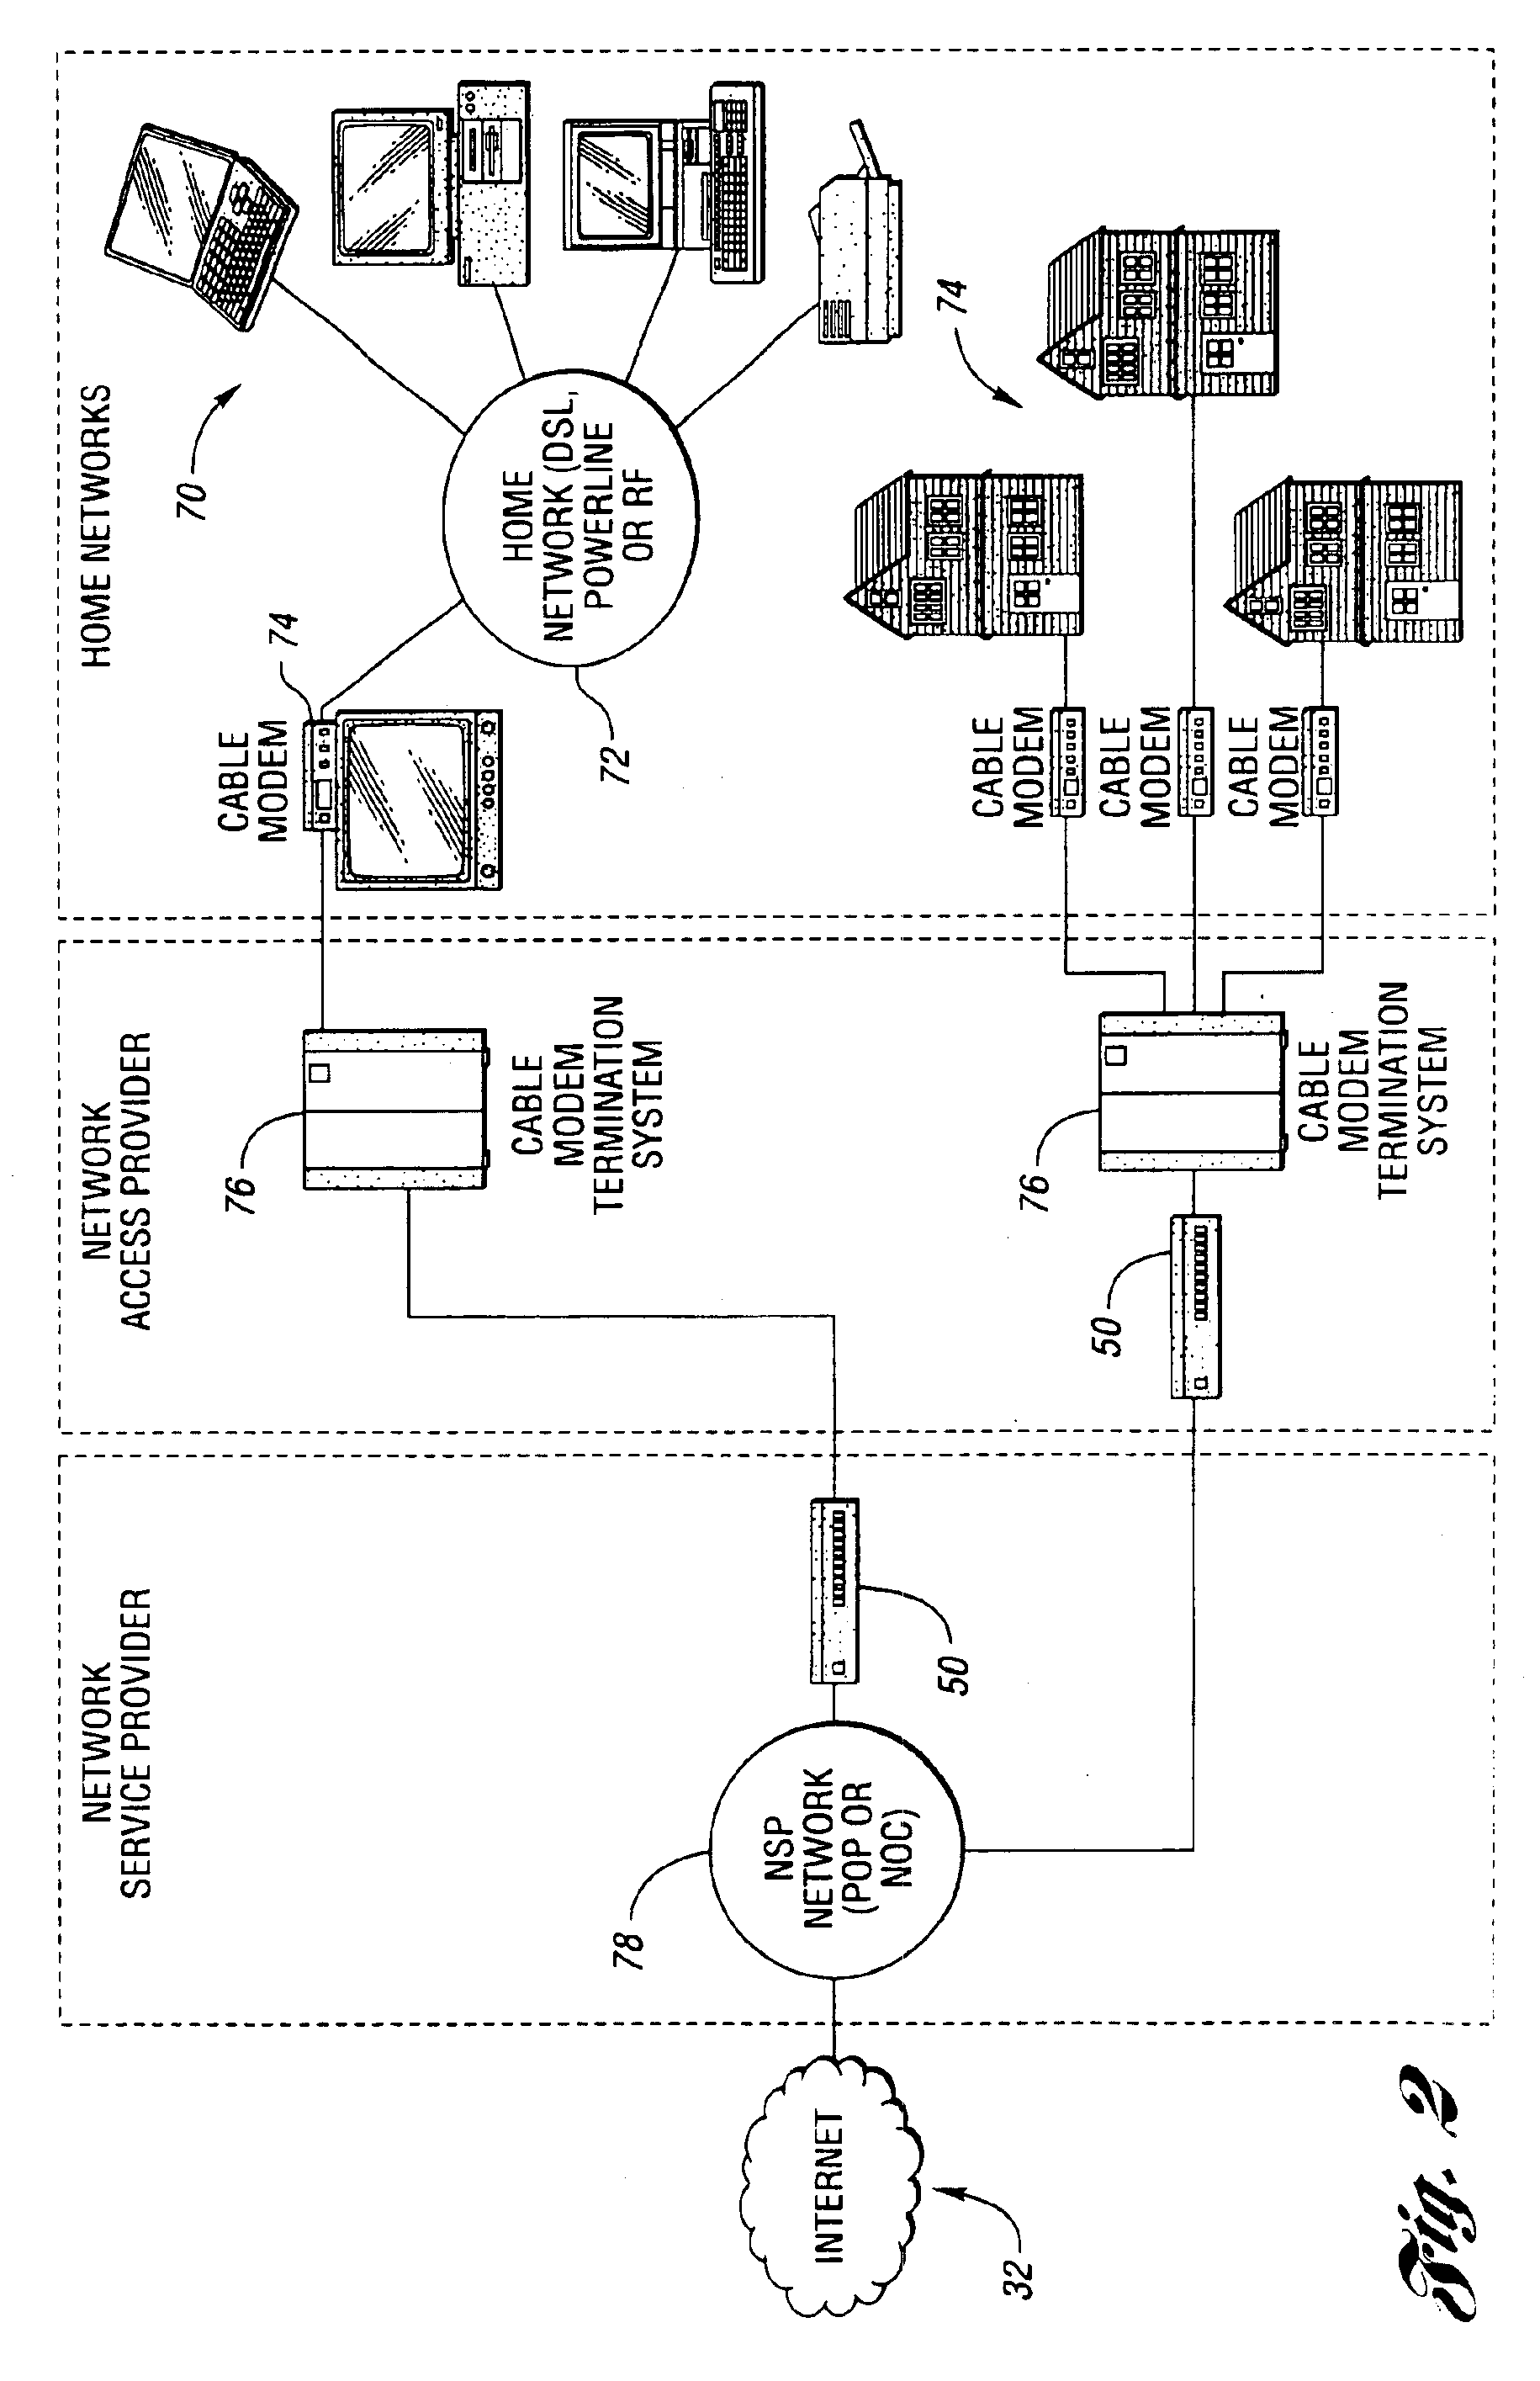 System and method for network access without reconfiguration